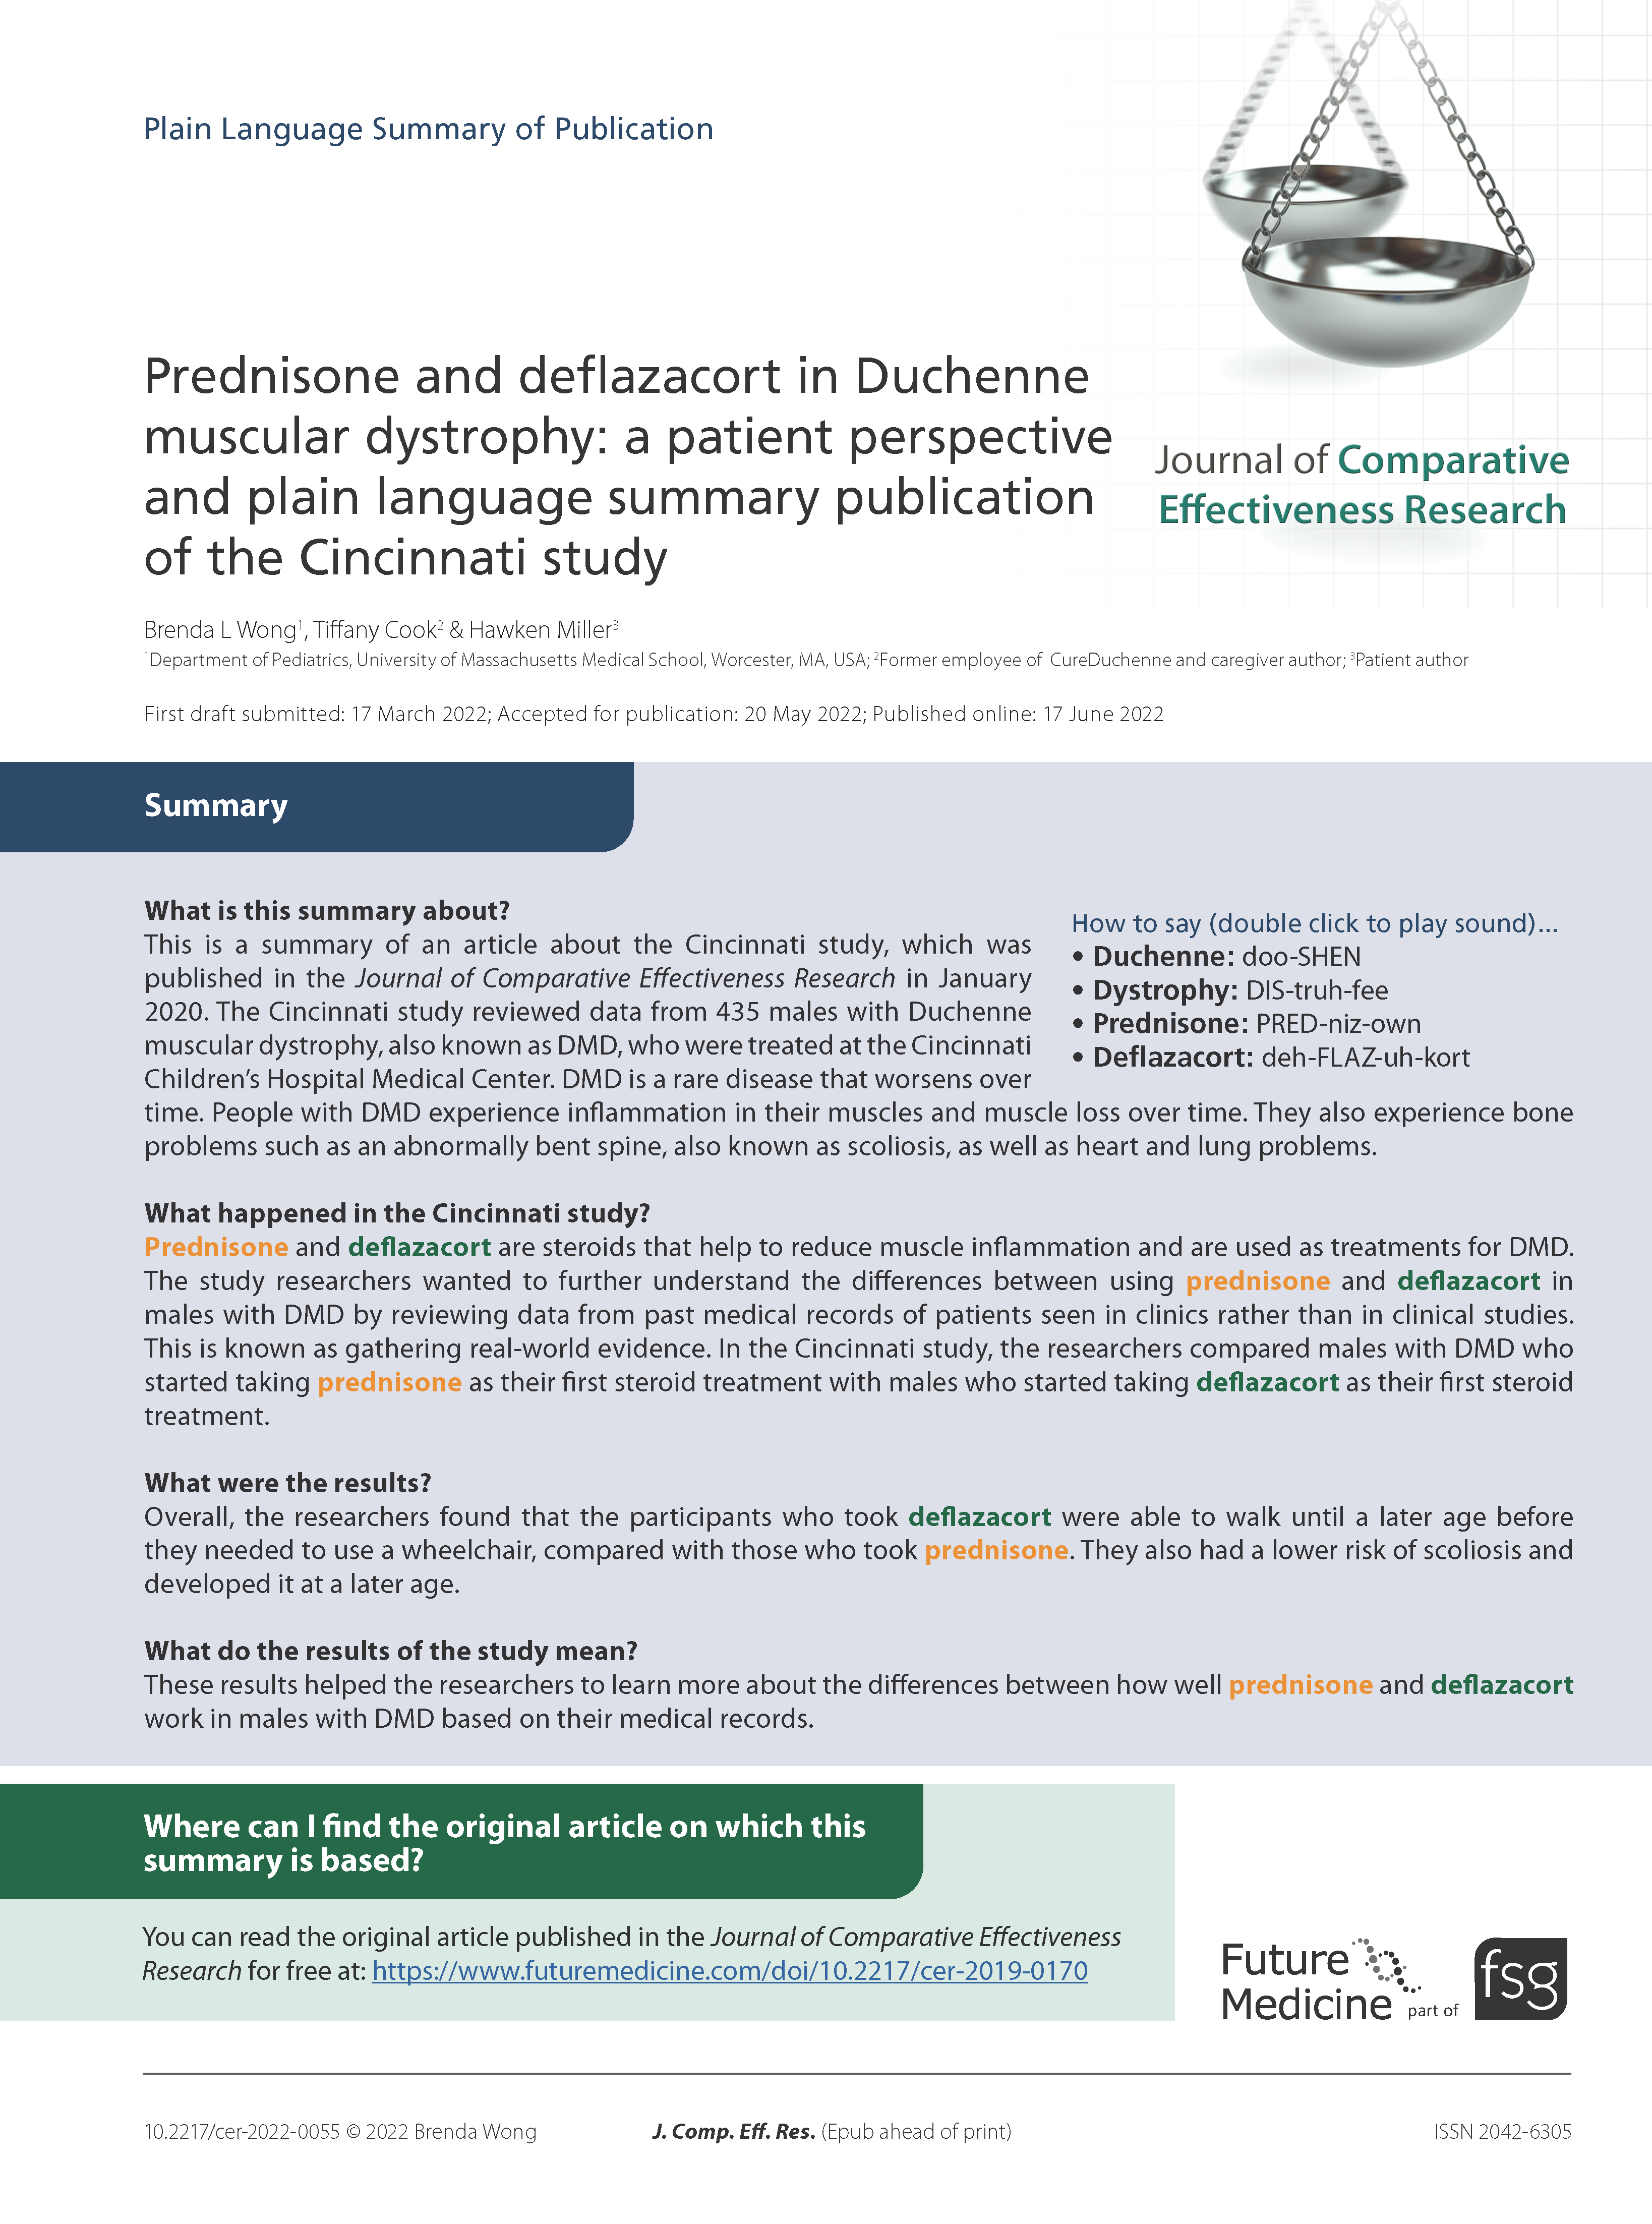 Prednisone and deflazacort in Duchenne muscular dystrophy: a patient perspective and plain language summary publication of the Cincinnati study